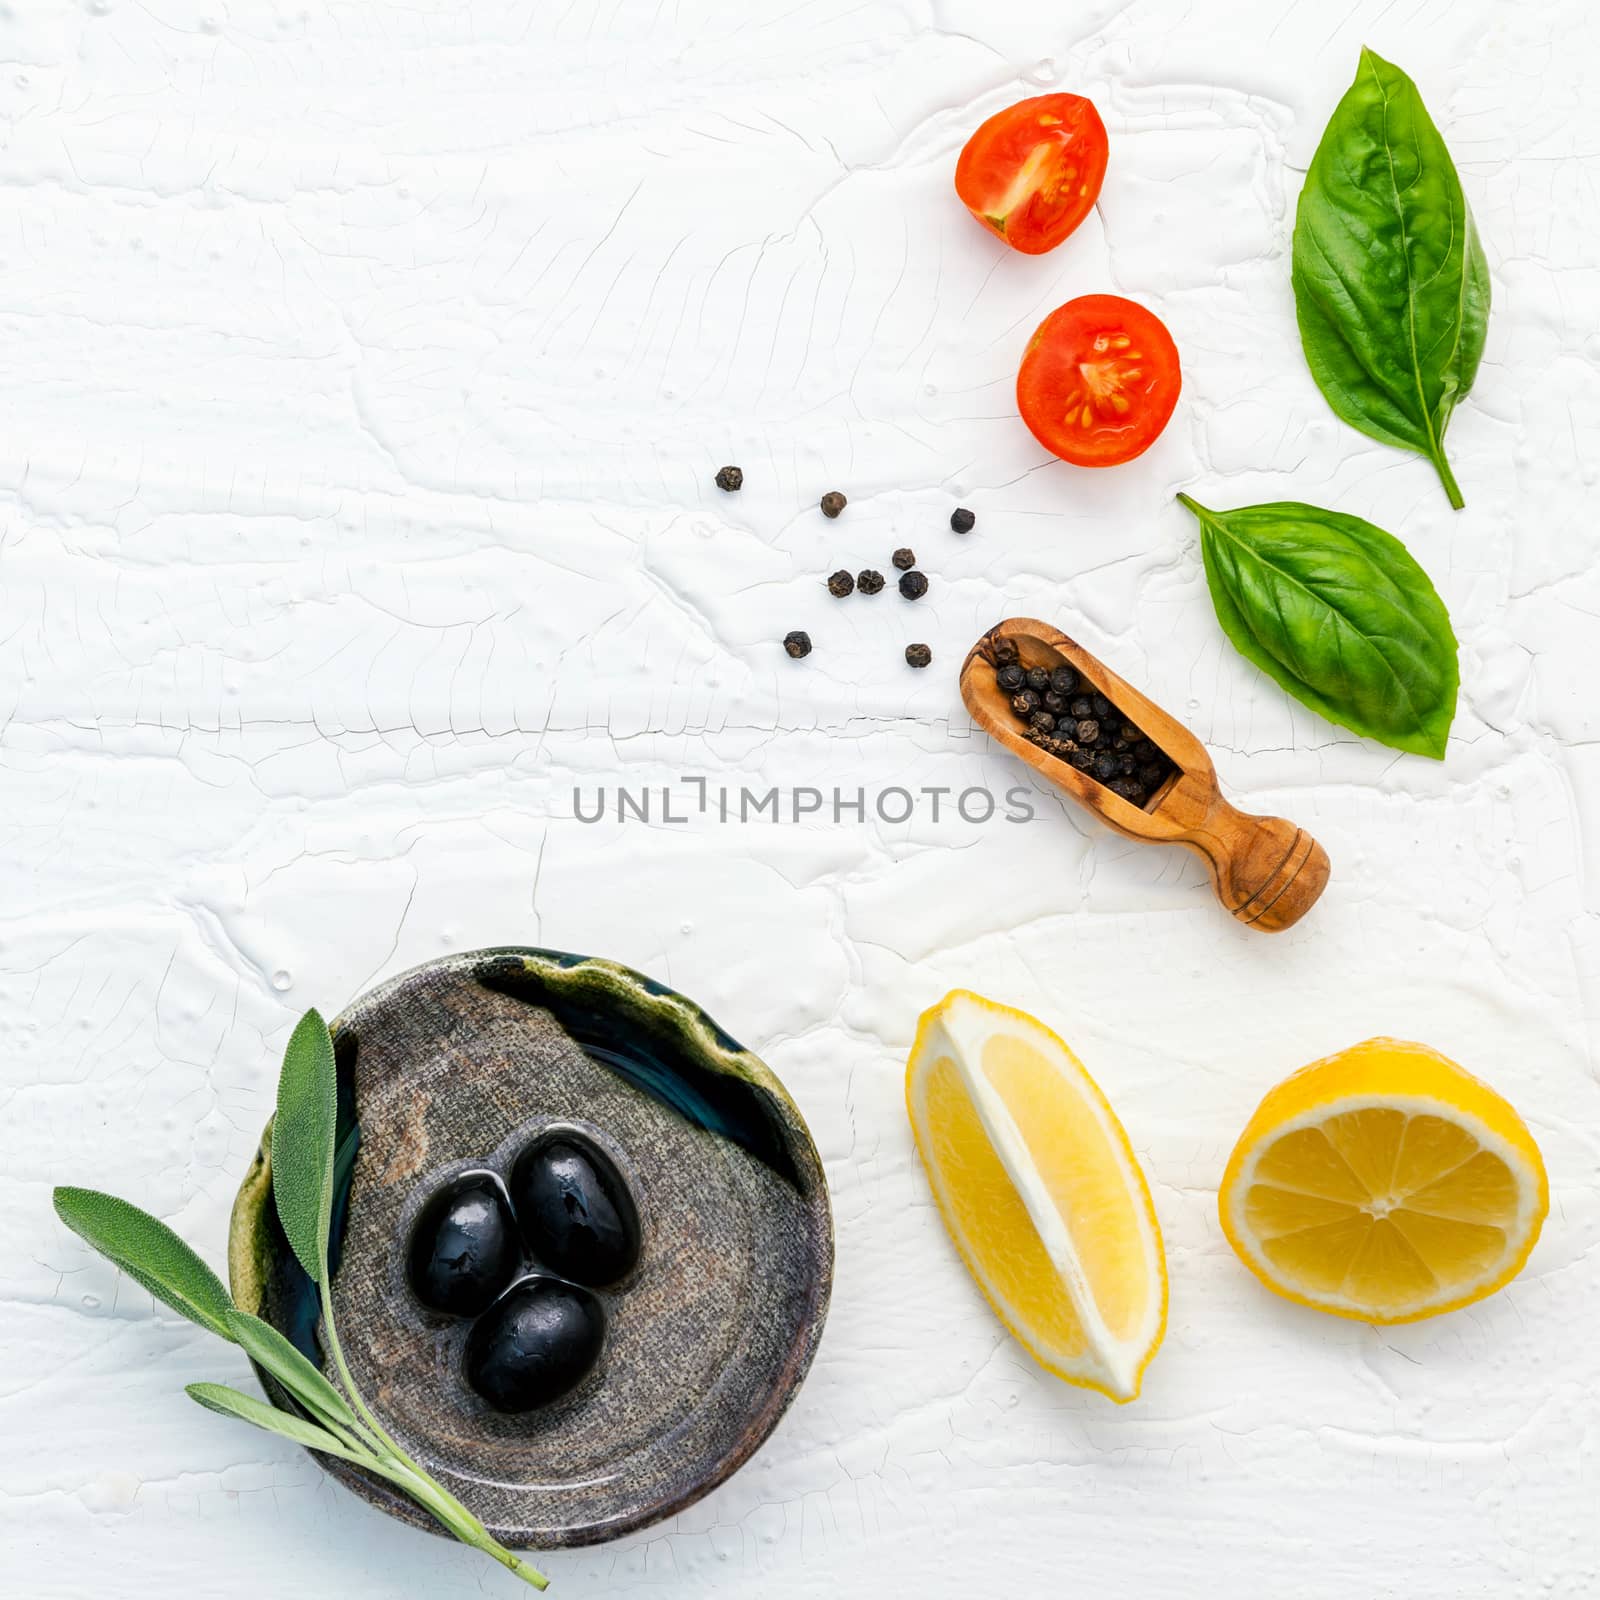 Food background with fresh herbs  tomato ,lemon slice , black pepper ,sage leaves ,sweet basil and olive oil over white wooden background  with flat lay and copy space.